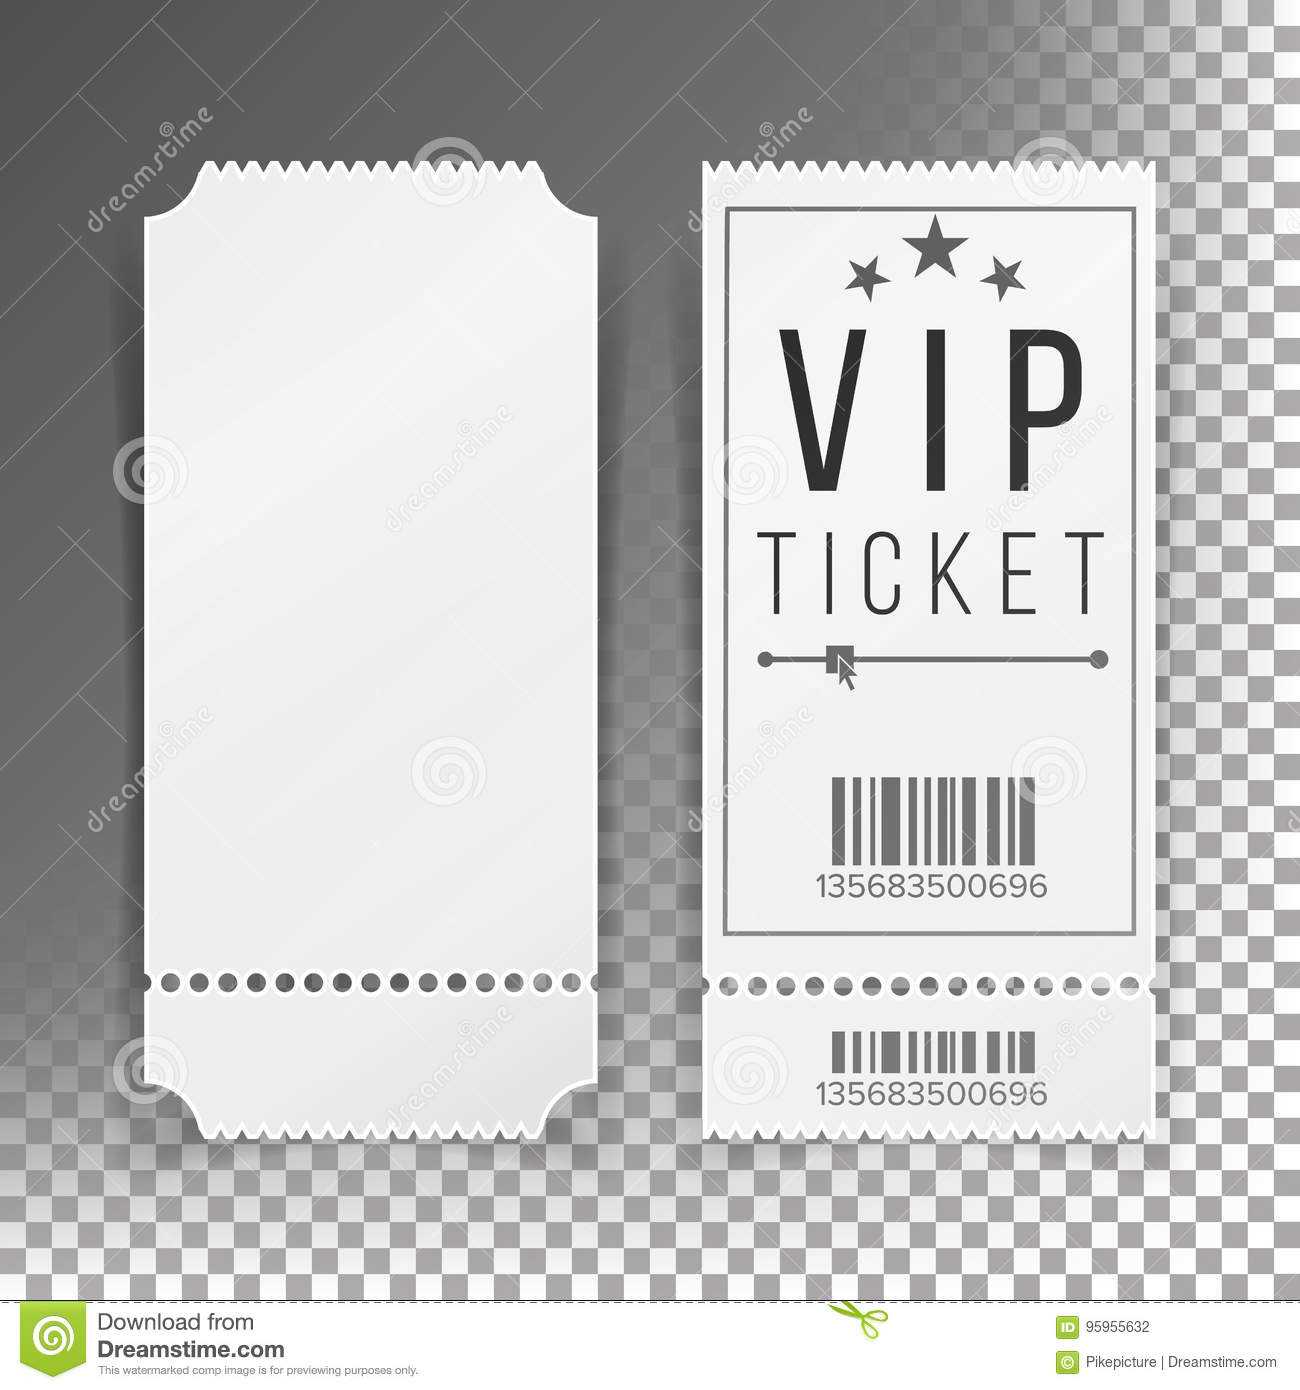 Ticket Template Set Vector. Blank Theater, Cinema, Train Throughout Blank Train Ticket Template